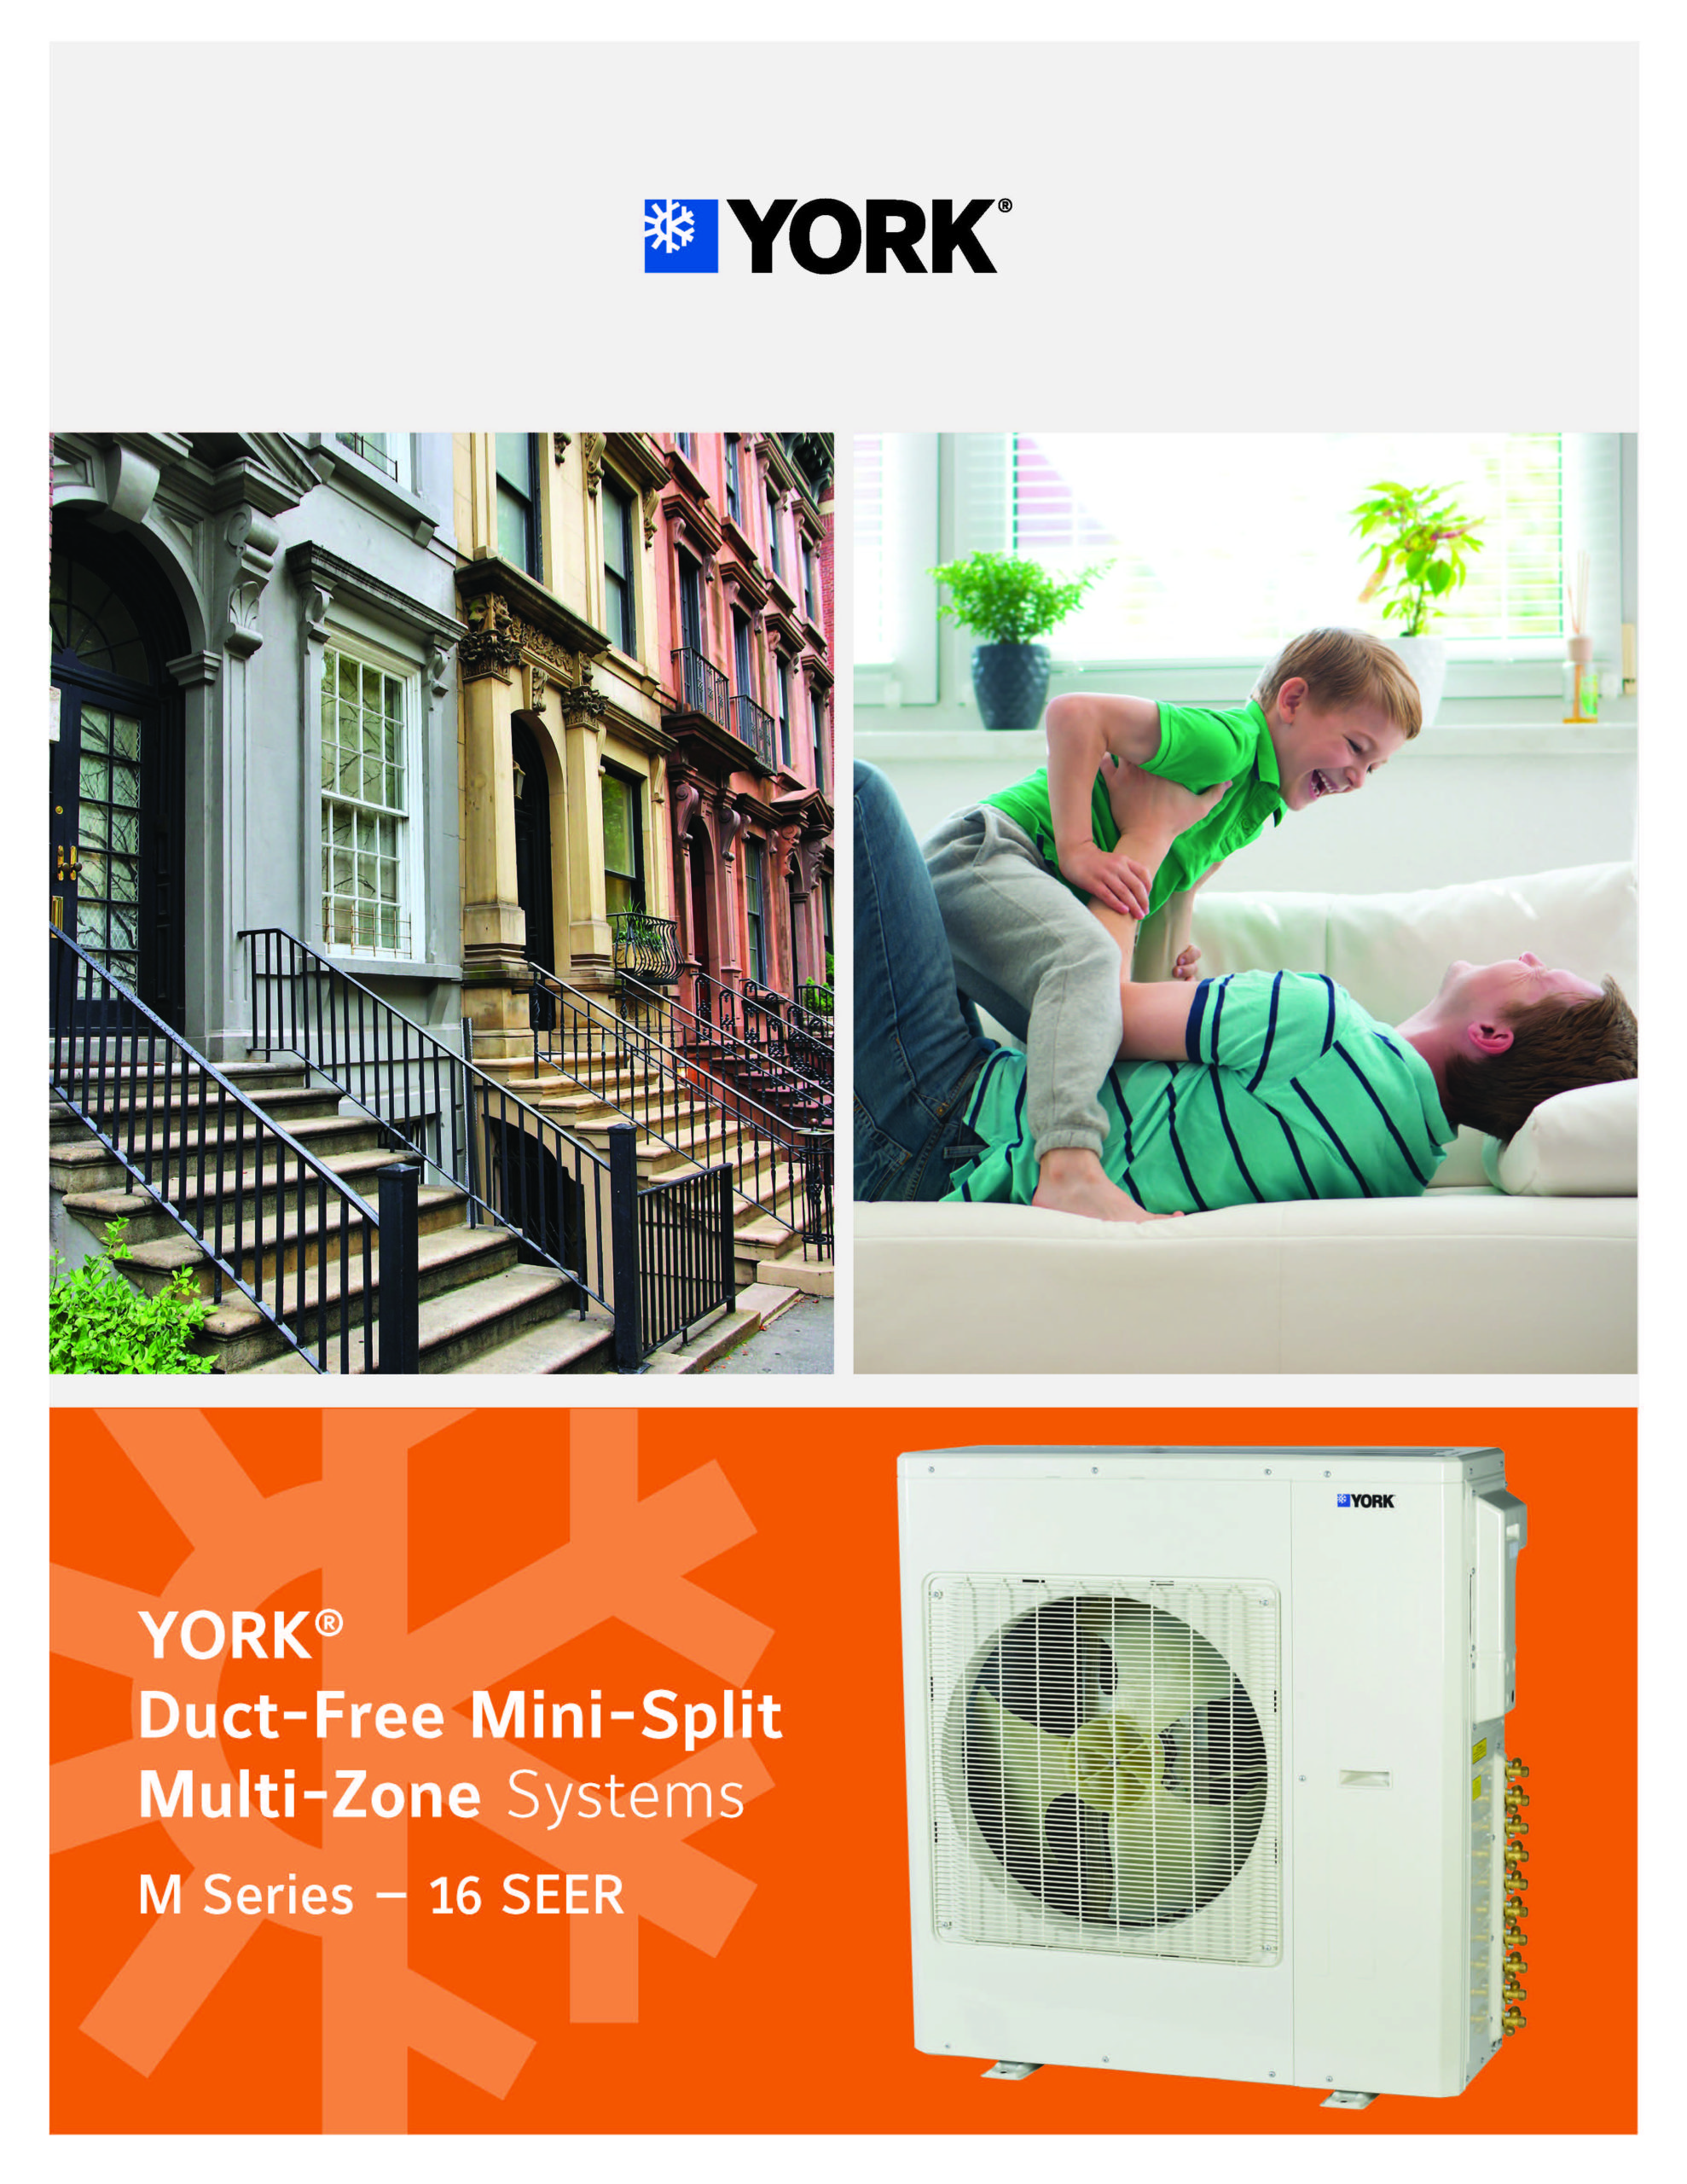 YORK Duct-Free Mini-Split Multi-Zone Systems Brochure Front Cover